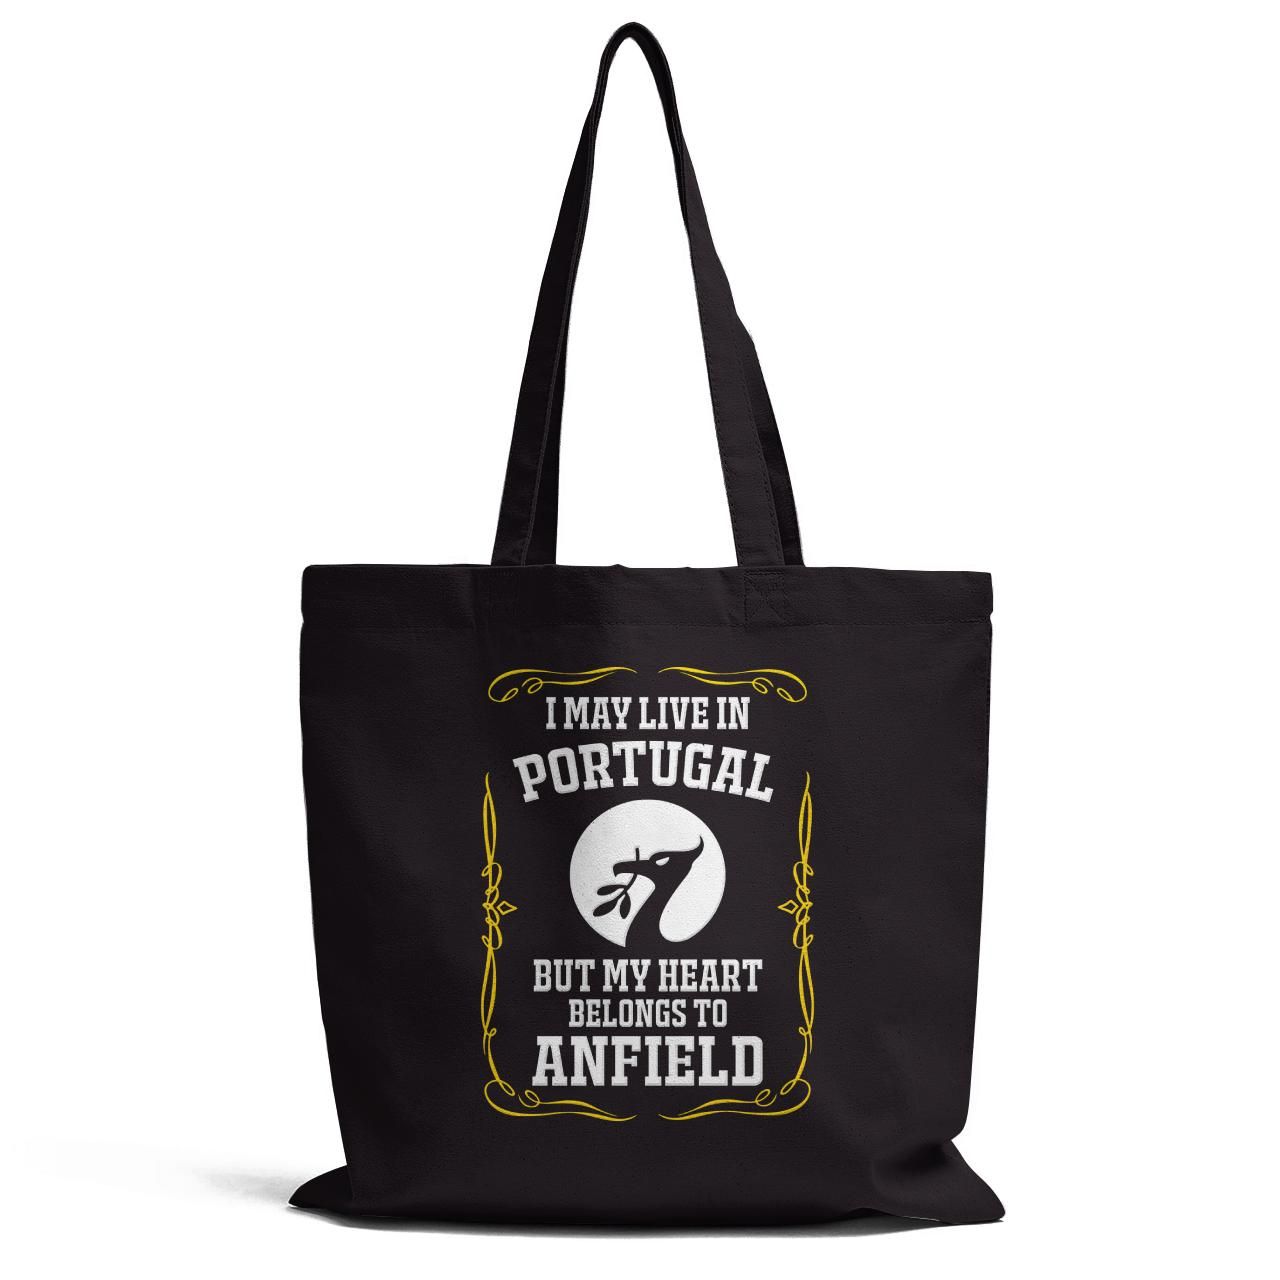 I May Live In Portugal But My Heart Belongs To Anfield Tote Bag